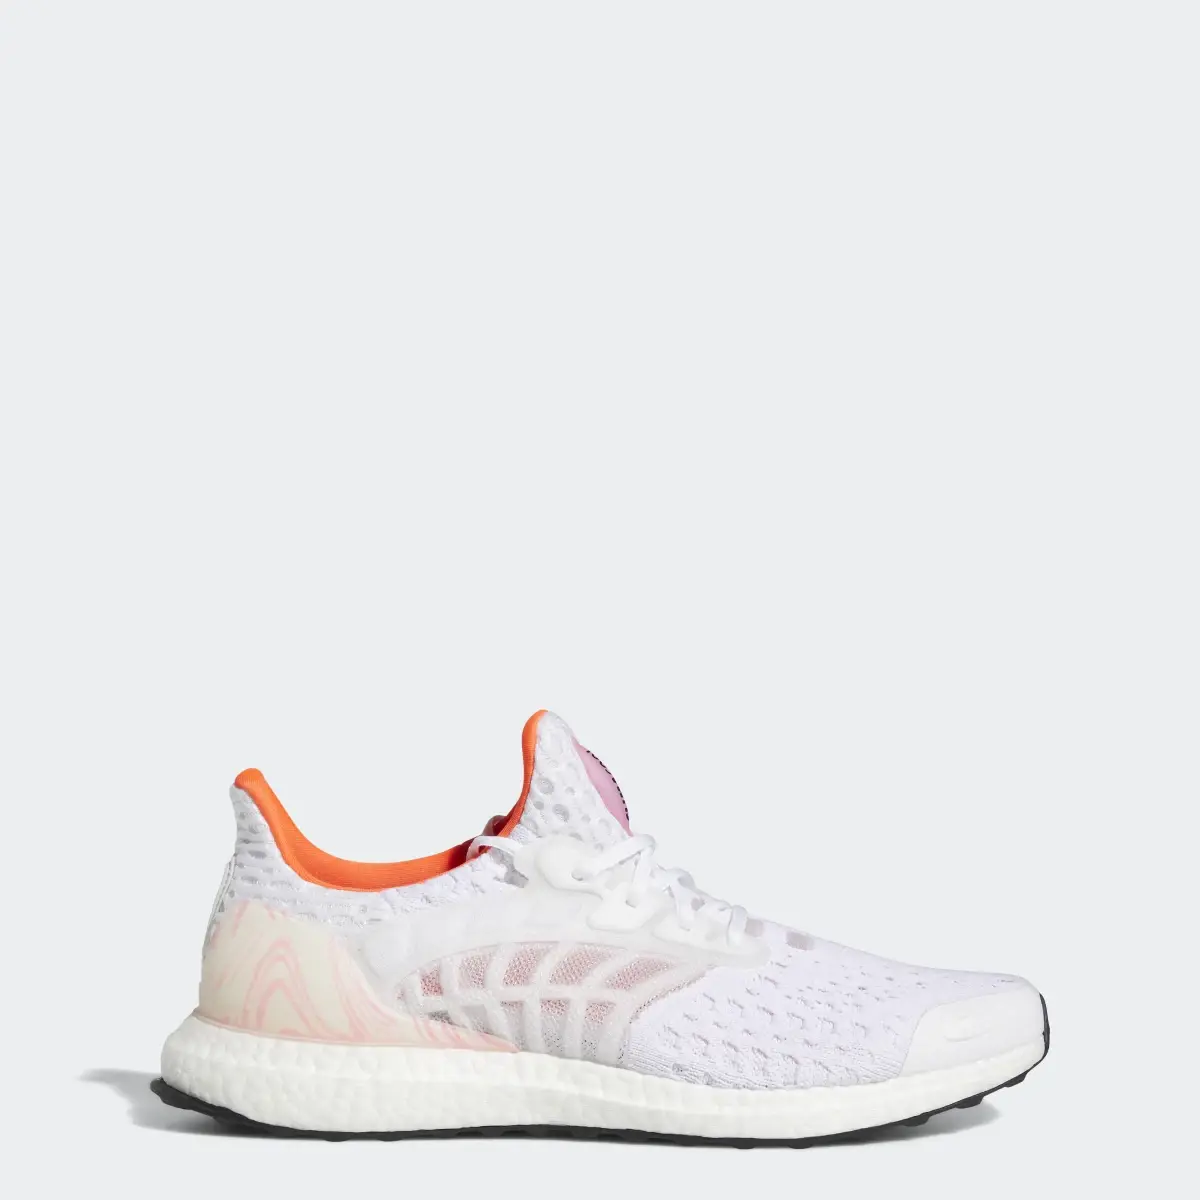 Adidas Chaussure Ultraboost CC_2 DNA Climacool Running Sportswear Lifestyle. 1